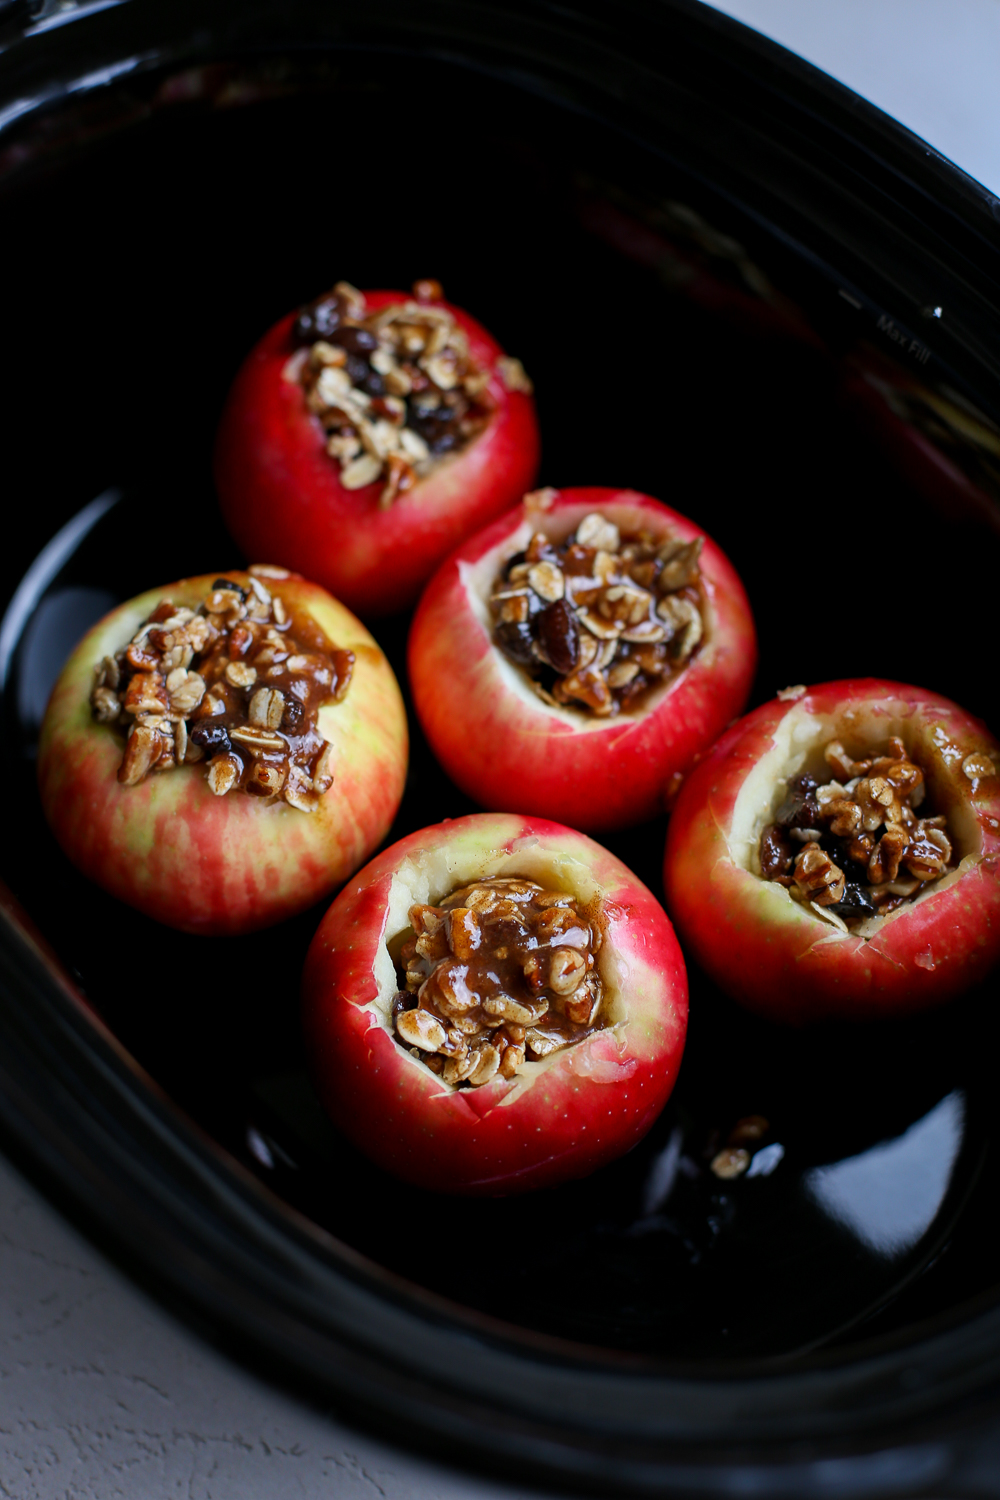 Uncooked cored apples with a filling in the middle being prepped to cook in the slow cooker.